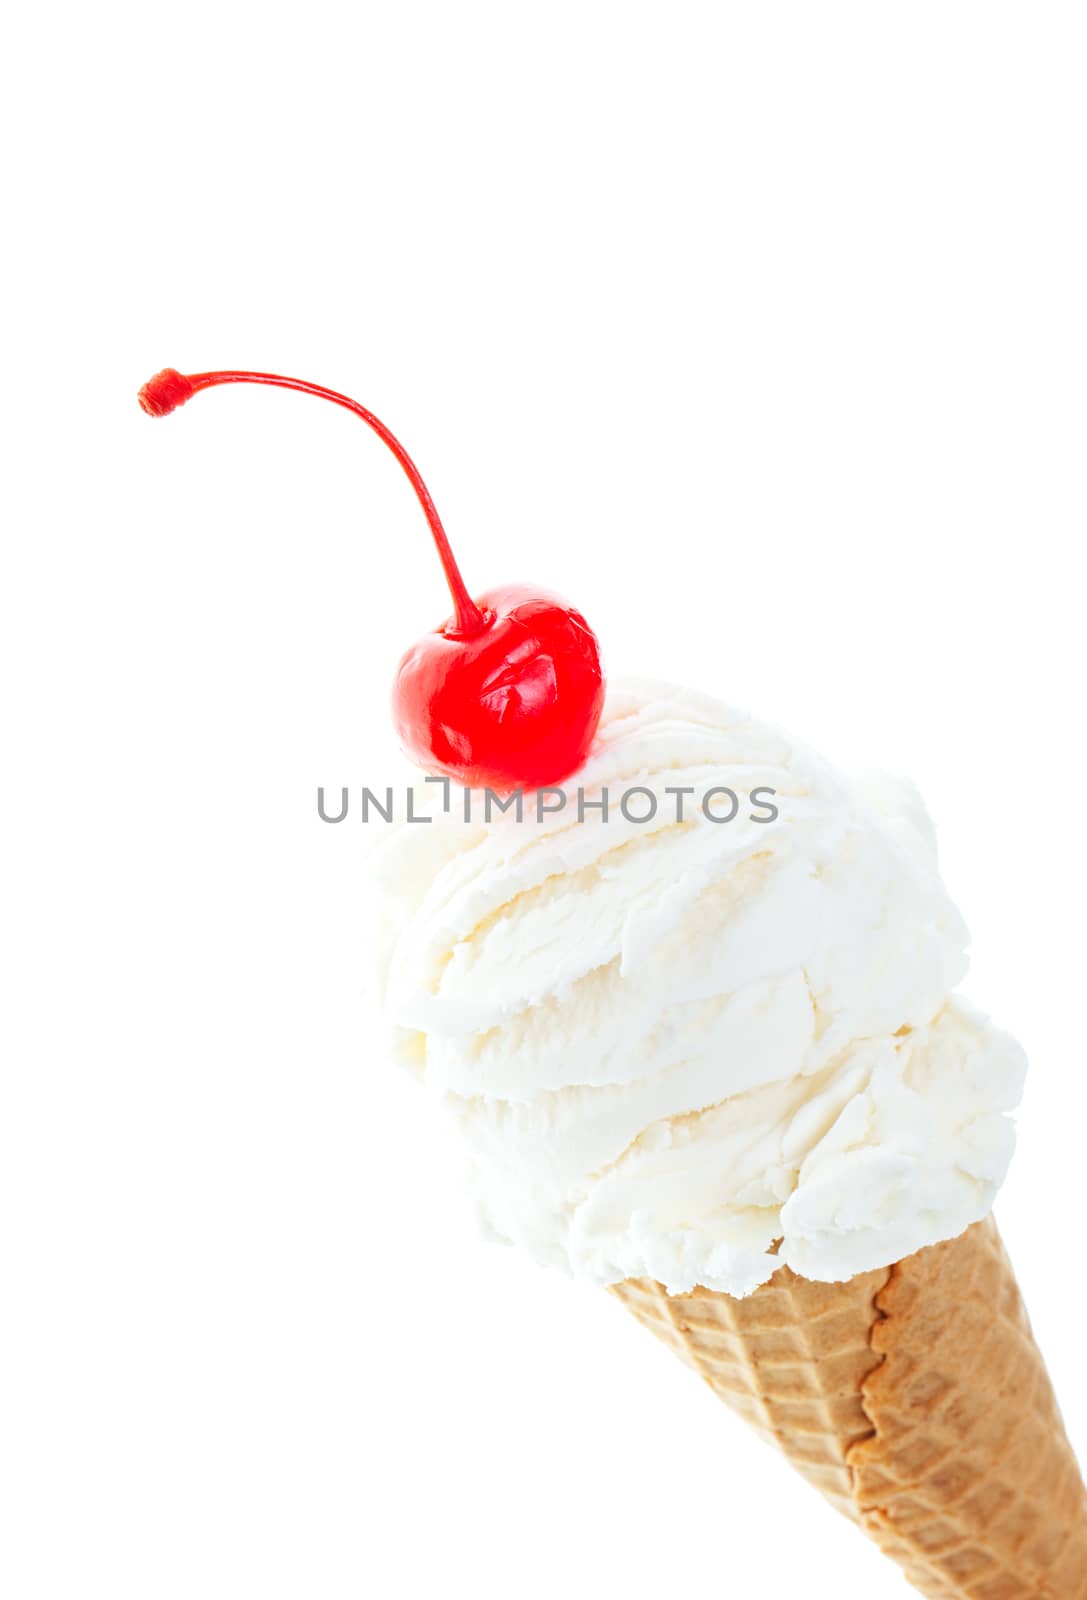 Vanilla ice cream, in a sugar cone, topped with a single, red cherry.  Shot on white background.